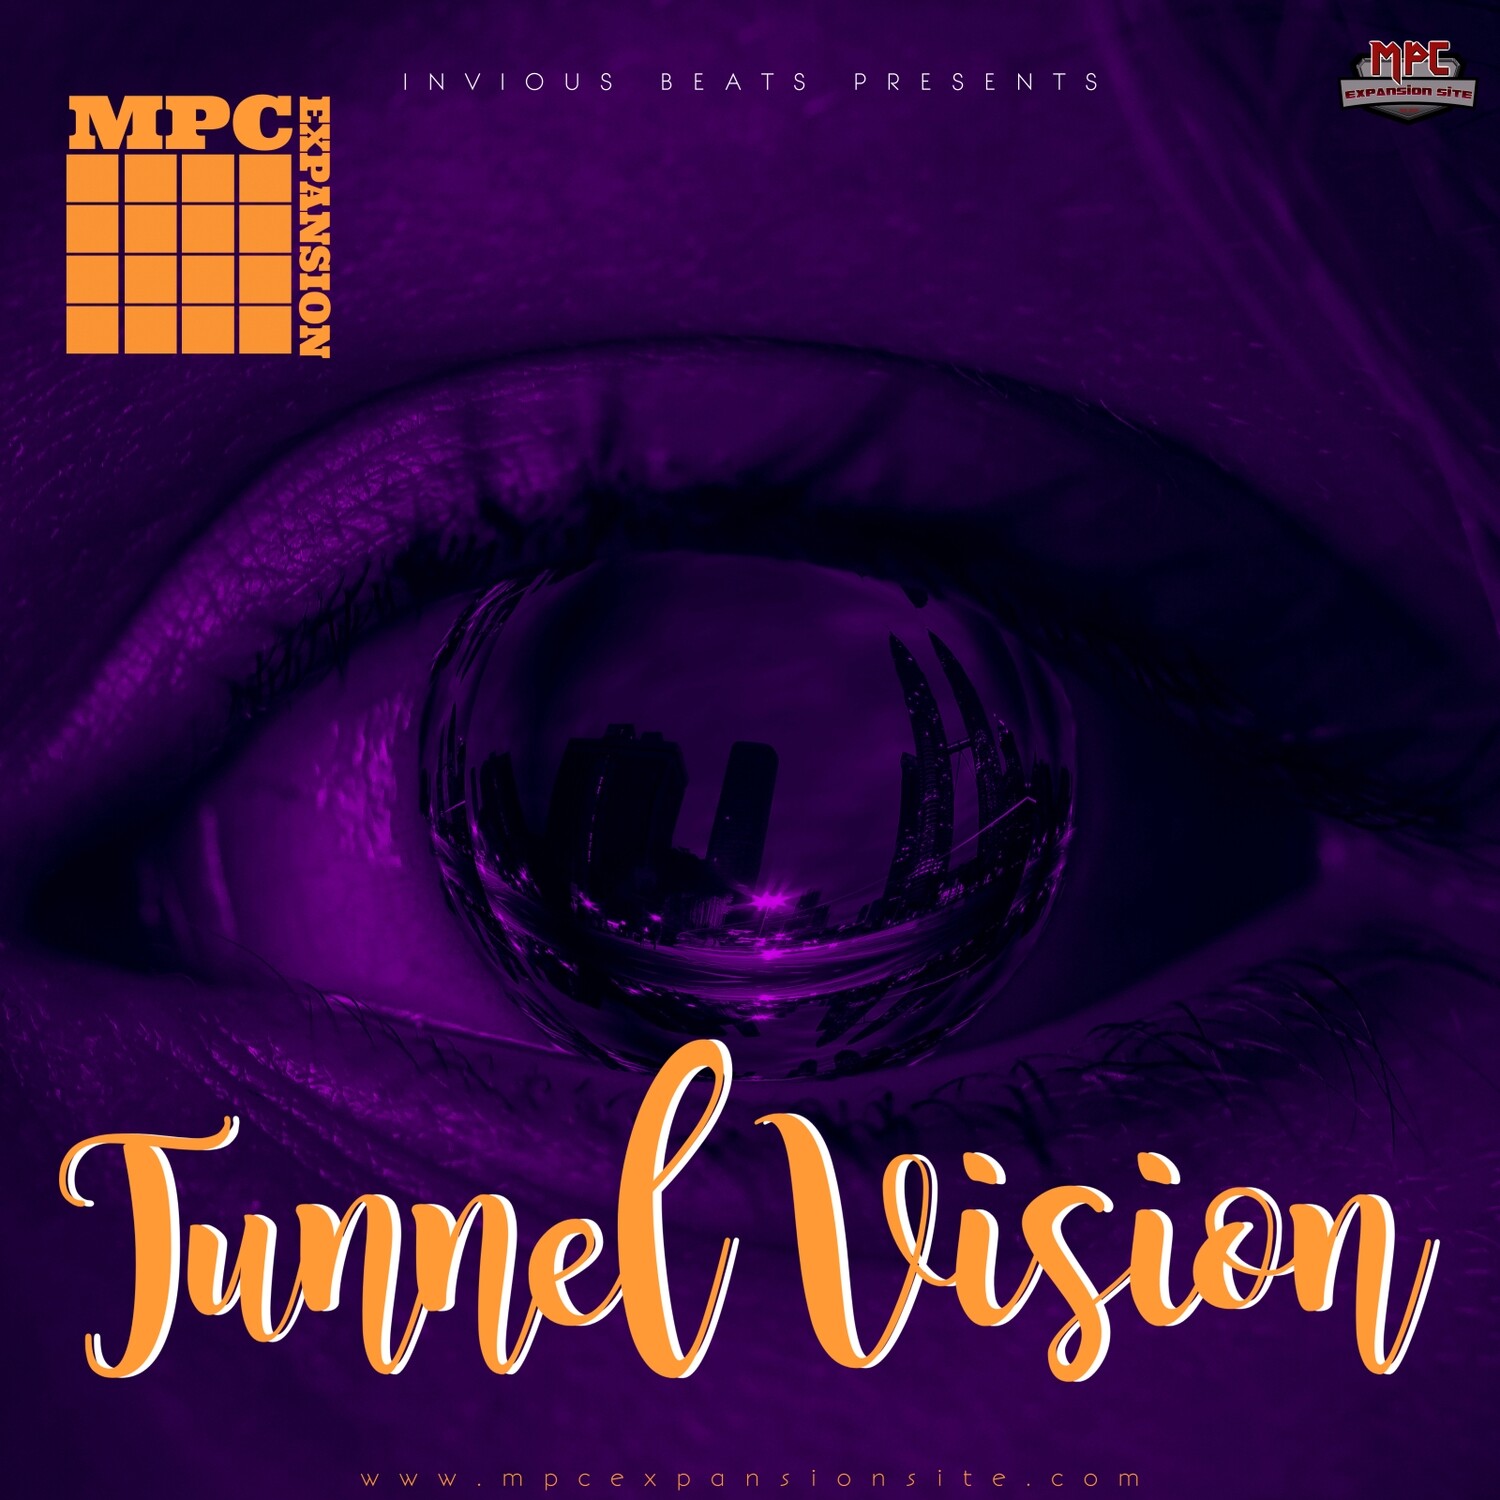 MPC EXPANSION 'TUNNEL VISION' by INVIOUS